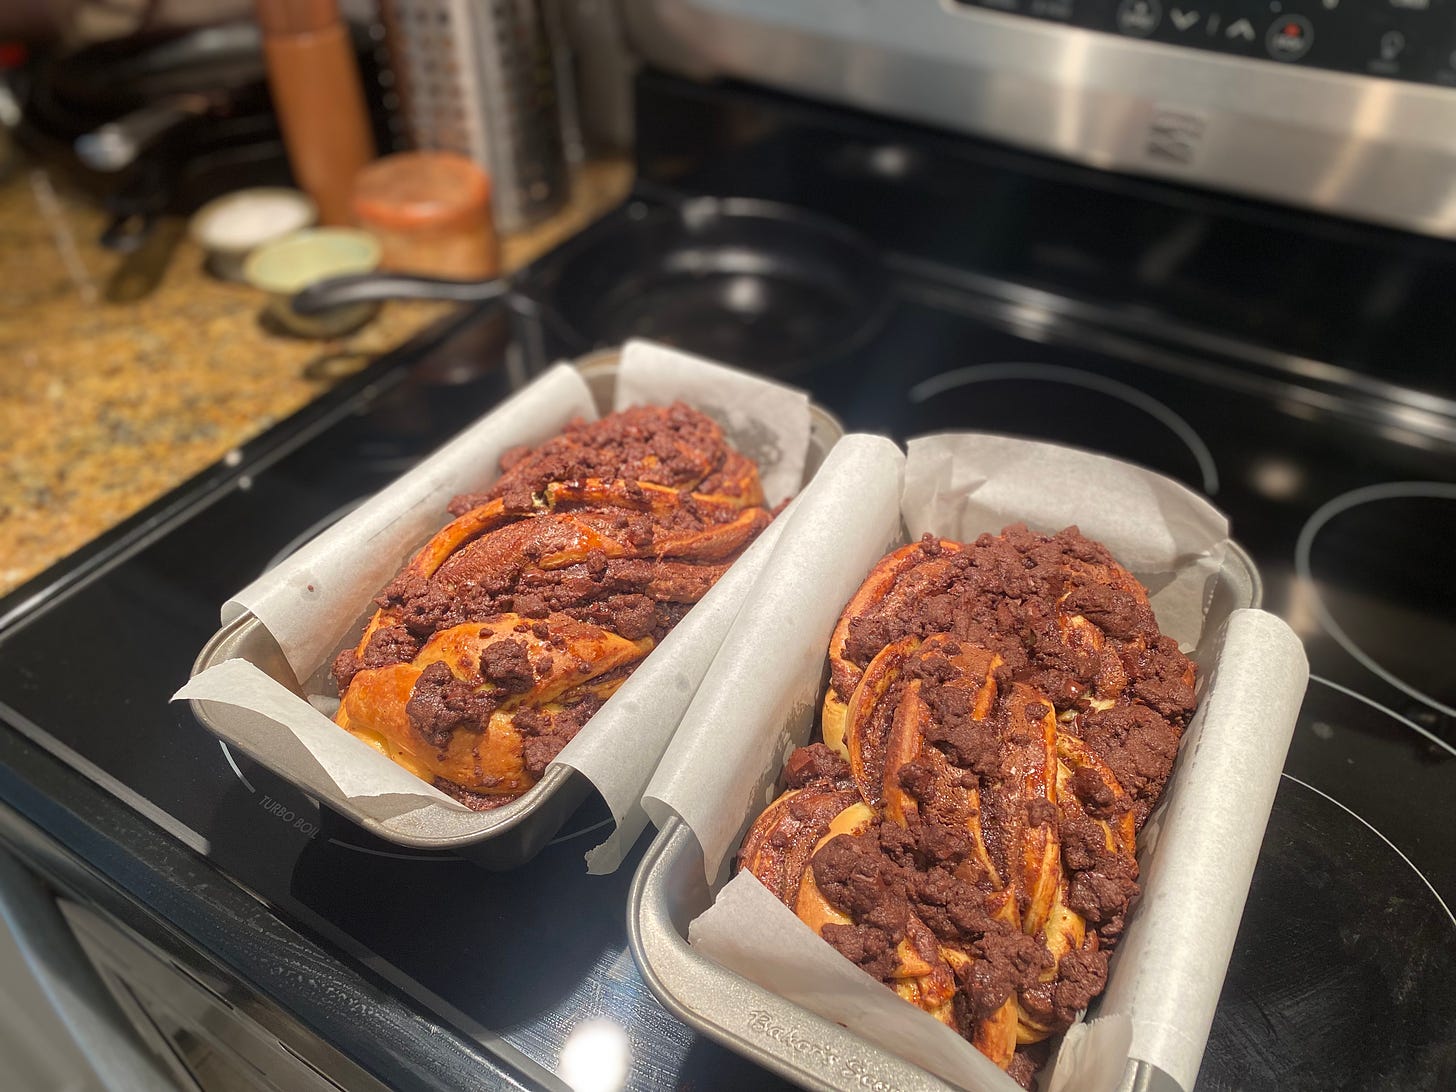 The two pans of babka, fresh out of the oven and resting on the stovetop. They are risen and browned from the oven, and there is a chocolate streusel topping which has puffed up as well.